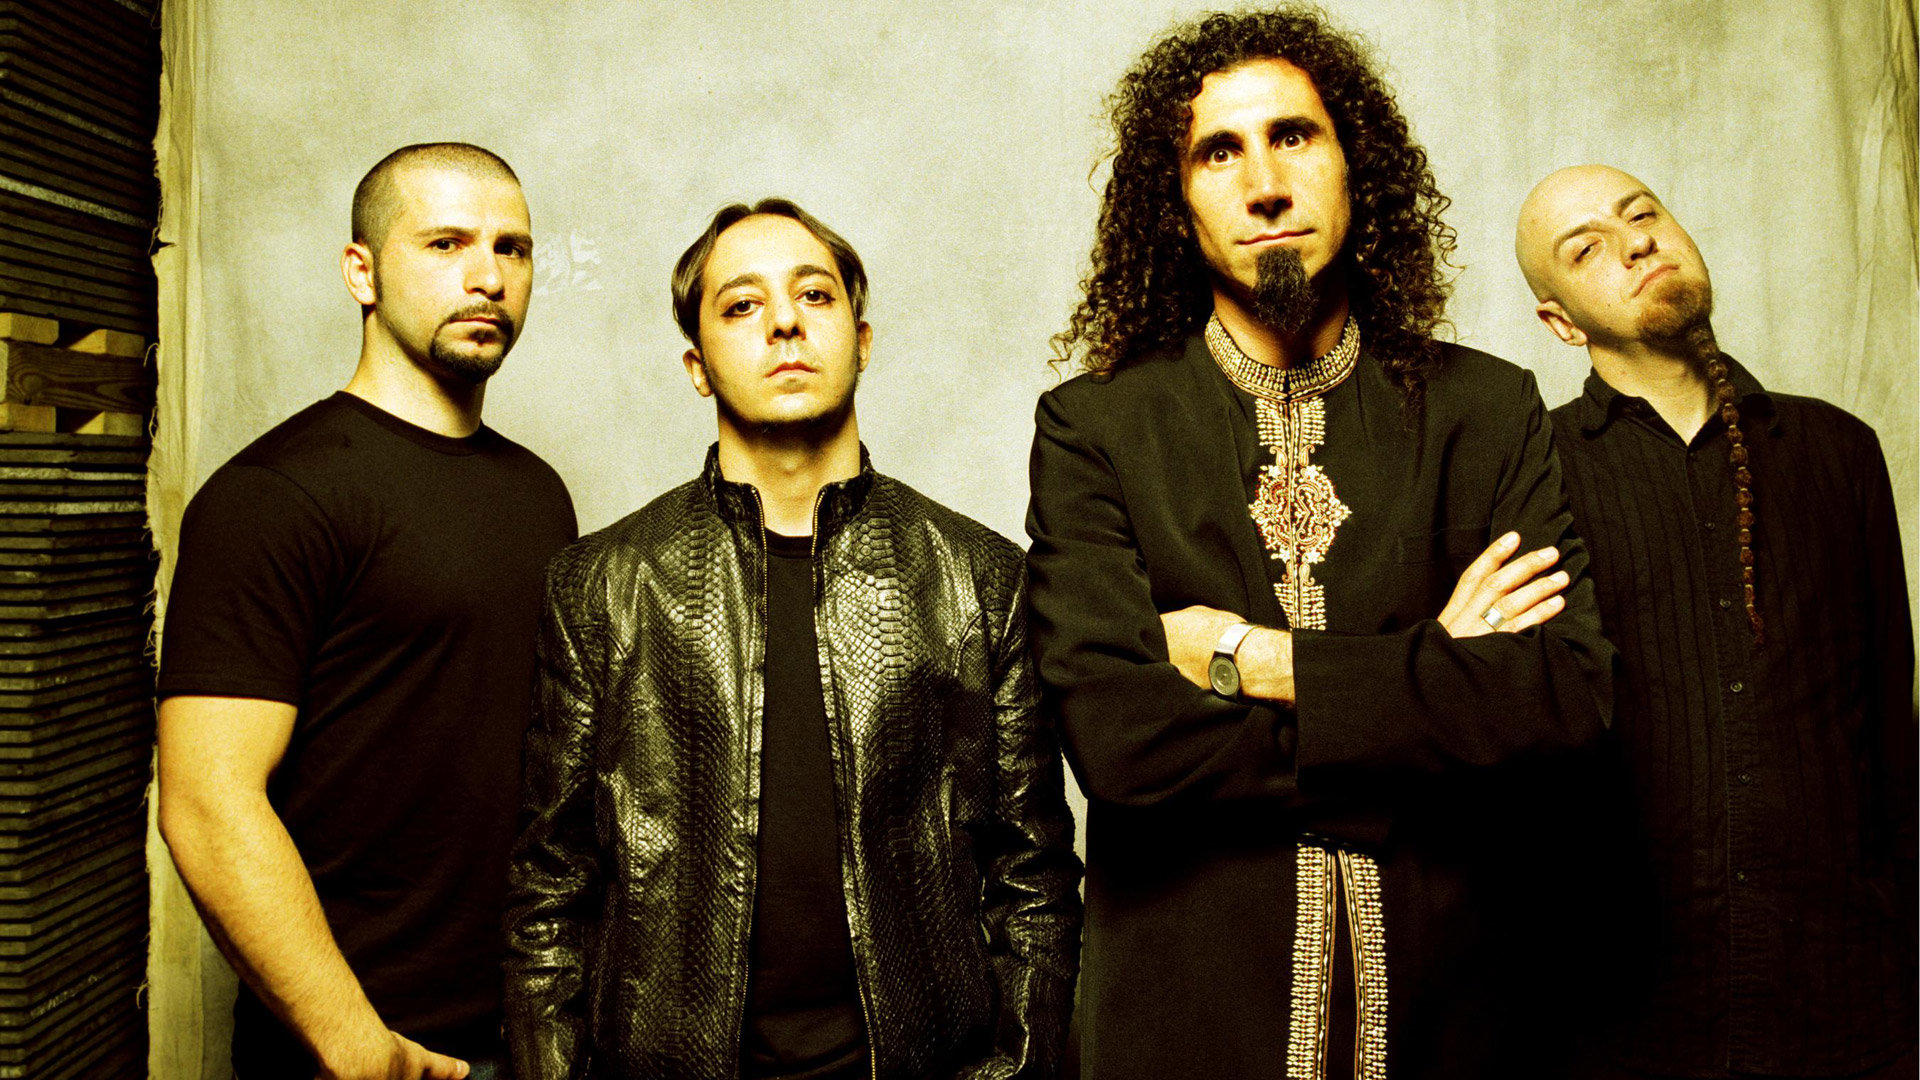 System Of A Down wallpapers 1920x1080 Full HD (1080p) desktop backgrounds